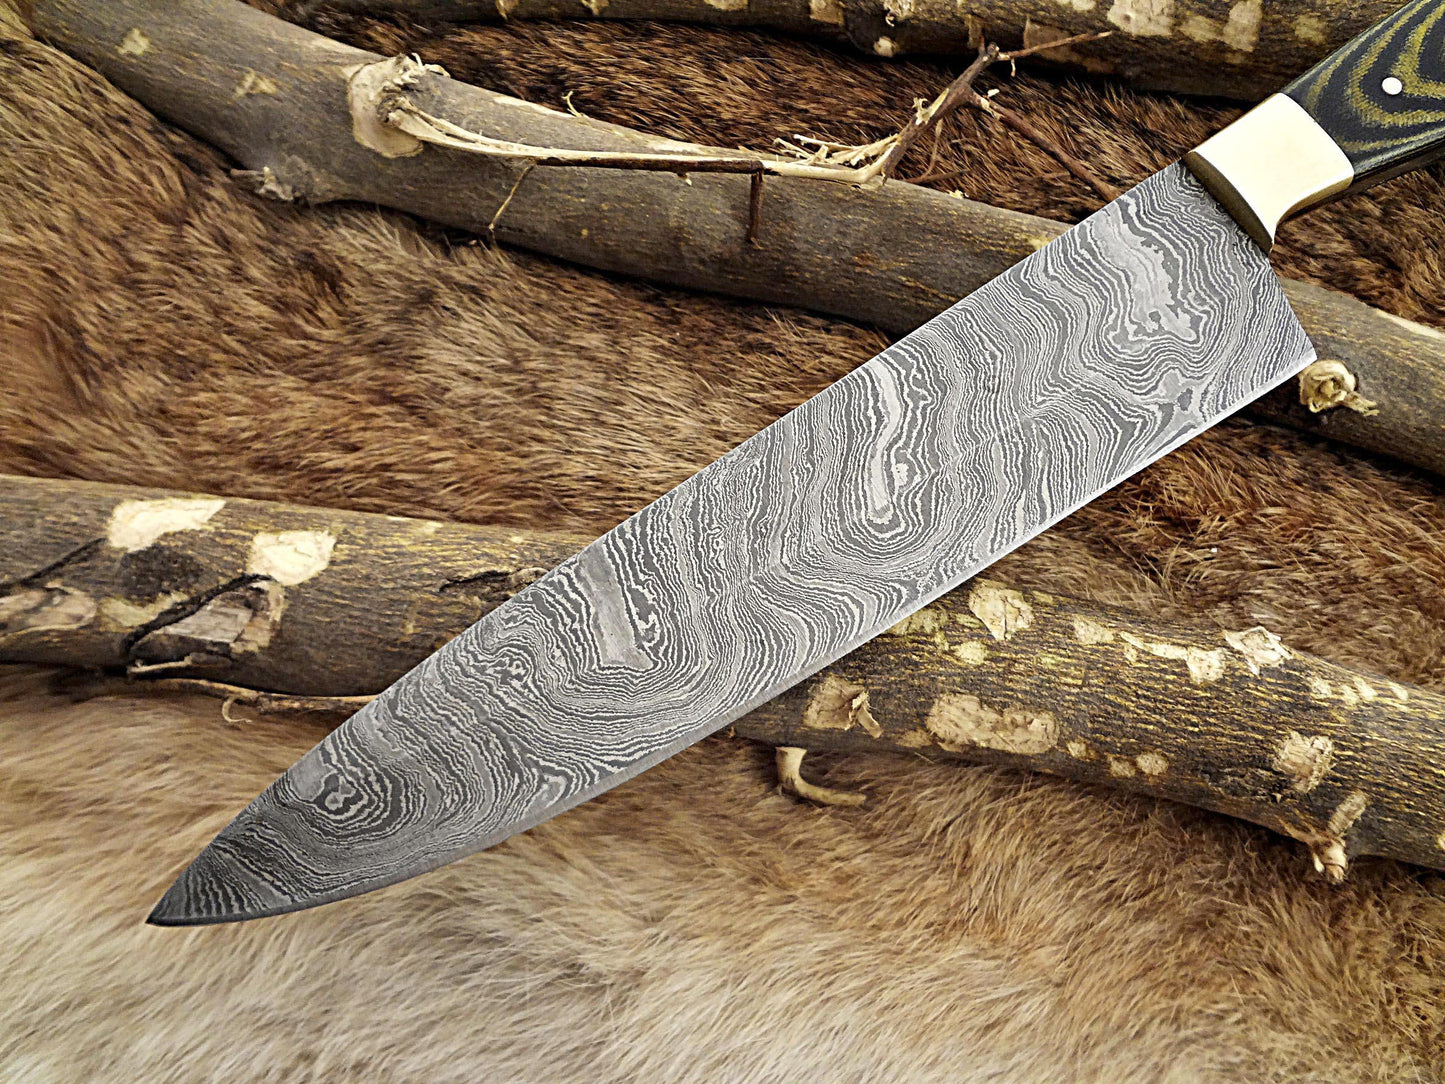 Damascus Steel kitchen Knife 13 Inches full tang 7.5" long Hand Forged blade, 2 Tone Dollar wood and brass bolster scale